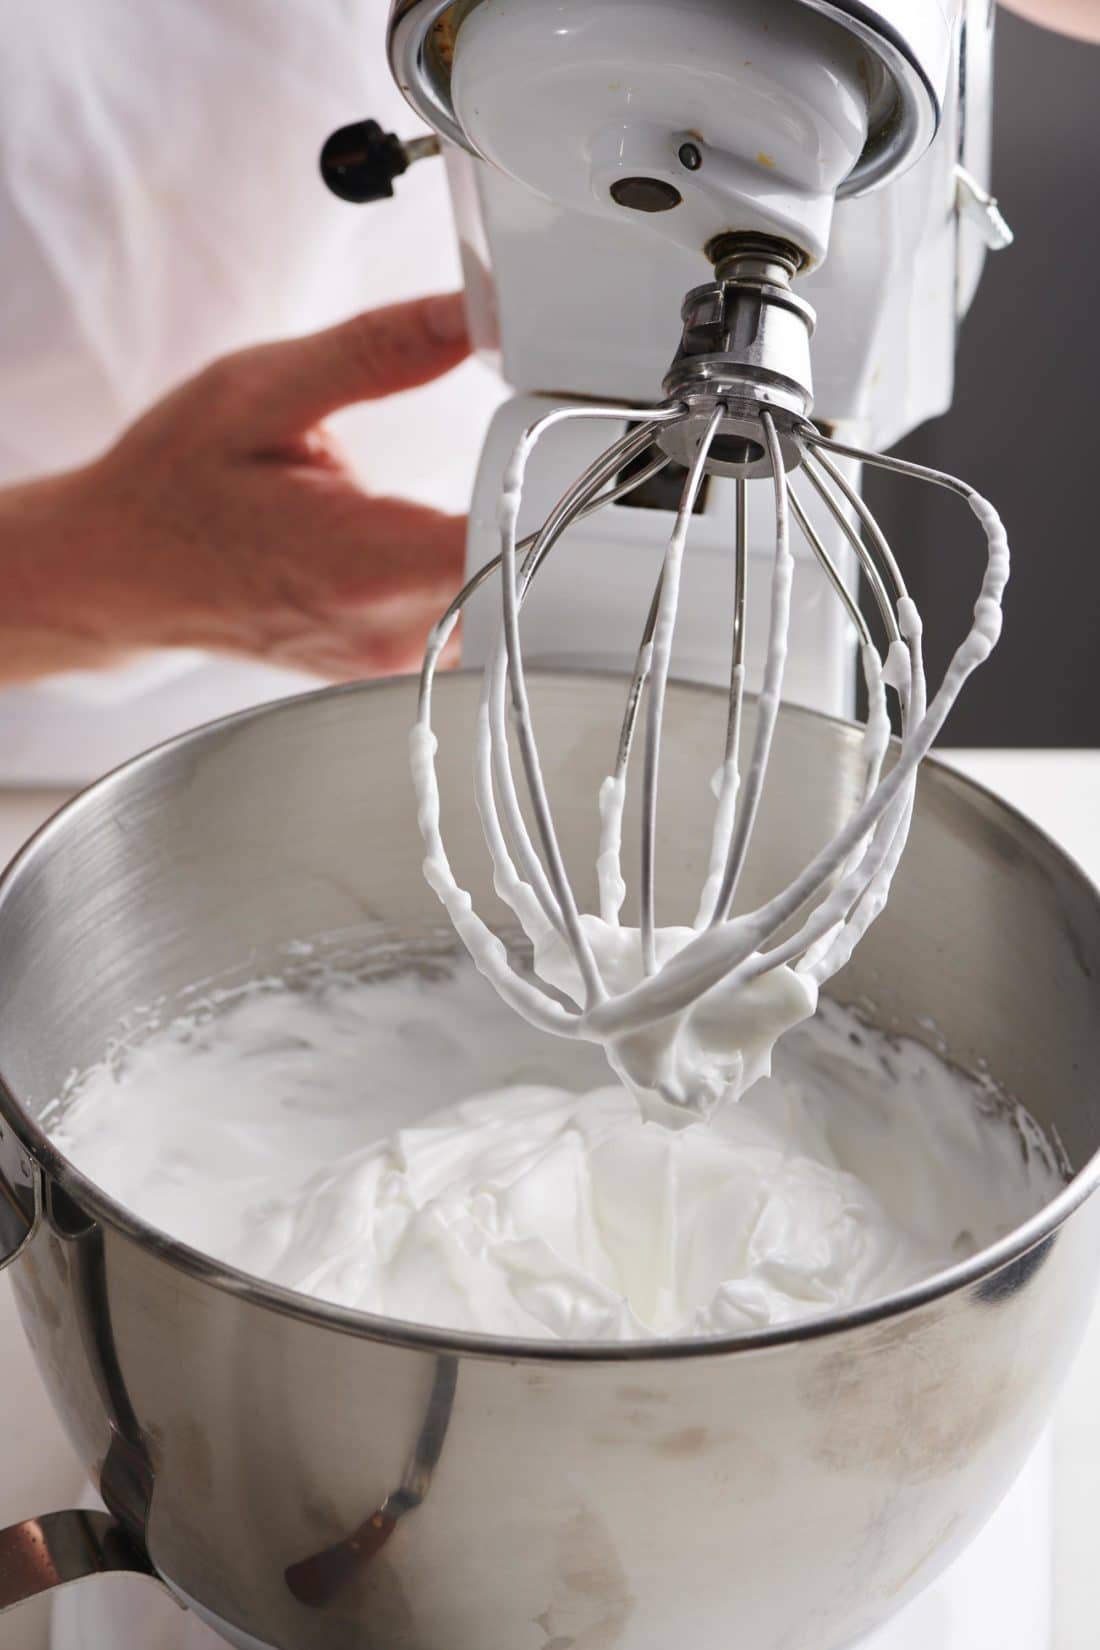 Electric beater with a bowl of meringue.